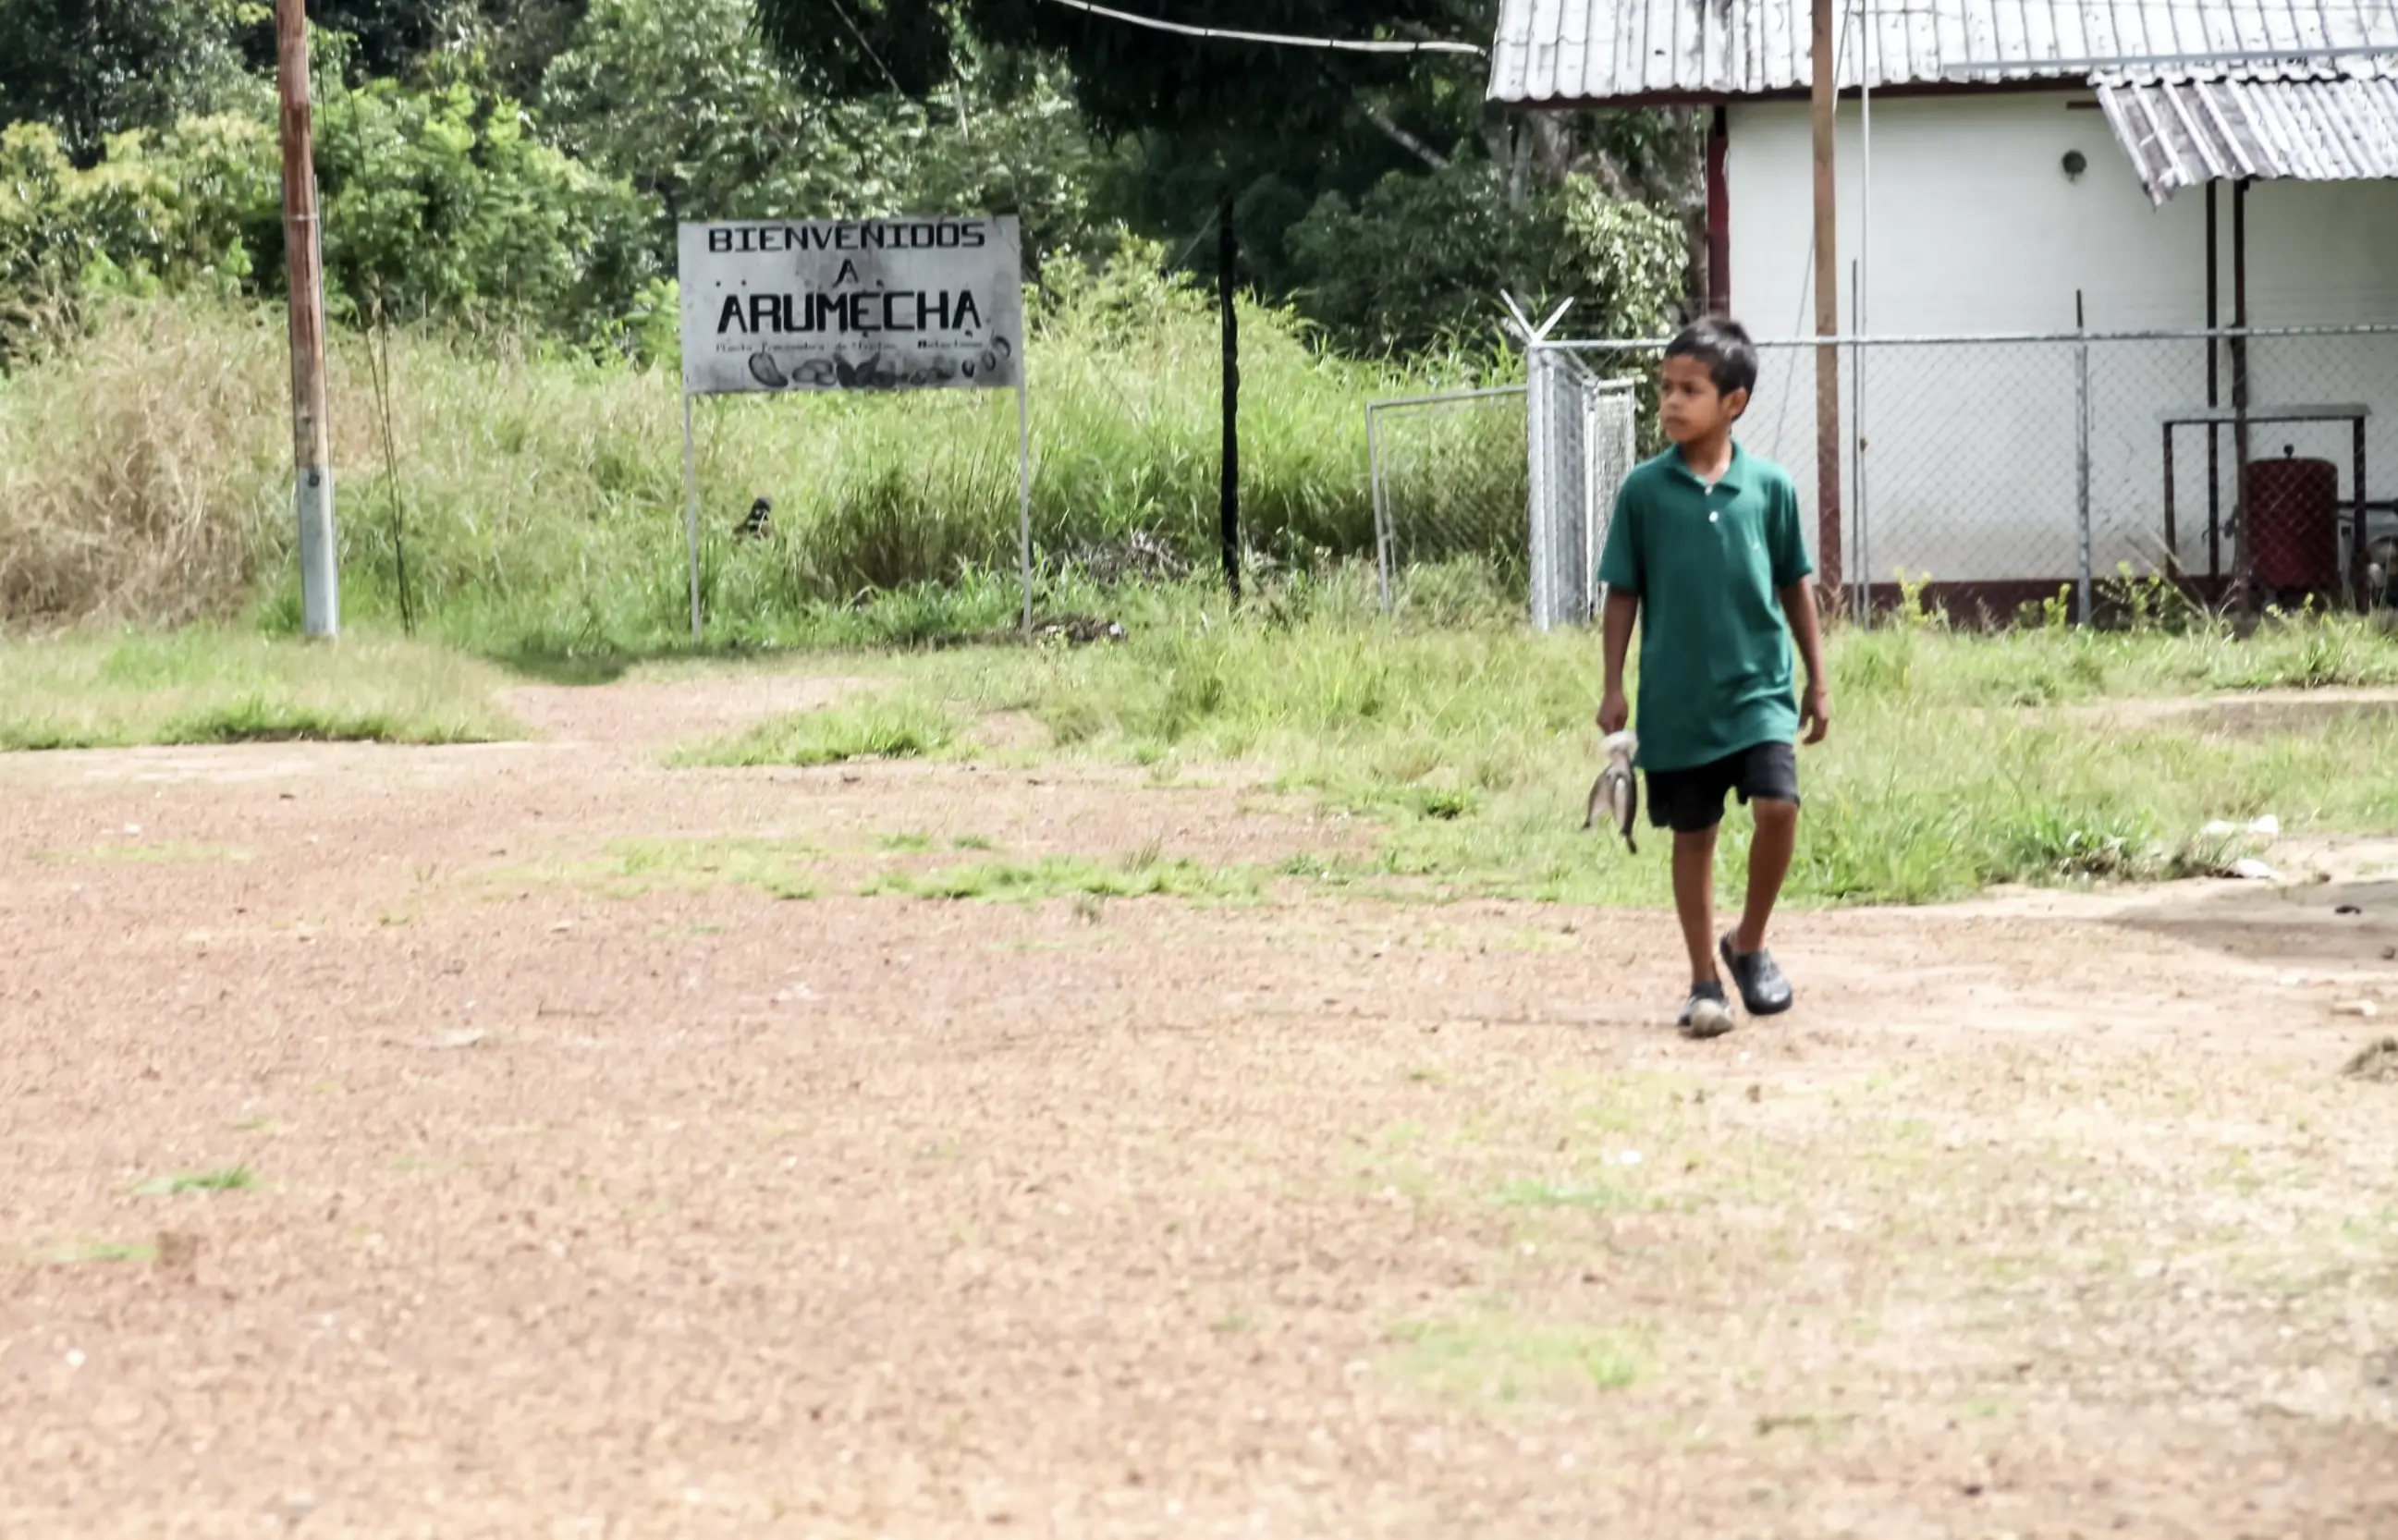 A young boy walks along a path with a Zinc metal roofed building behind him. In the background, a sign reads "Welcome to Arumecha" in Spanish.